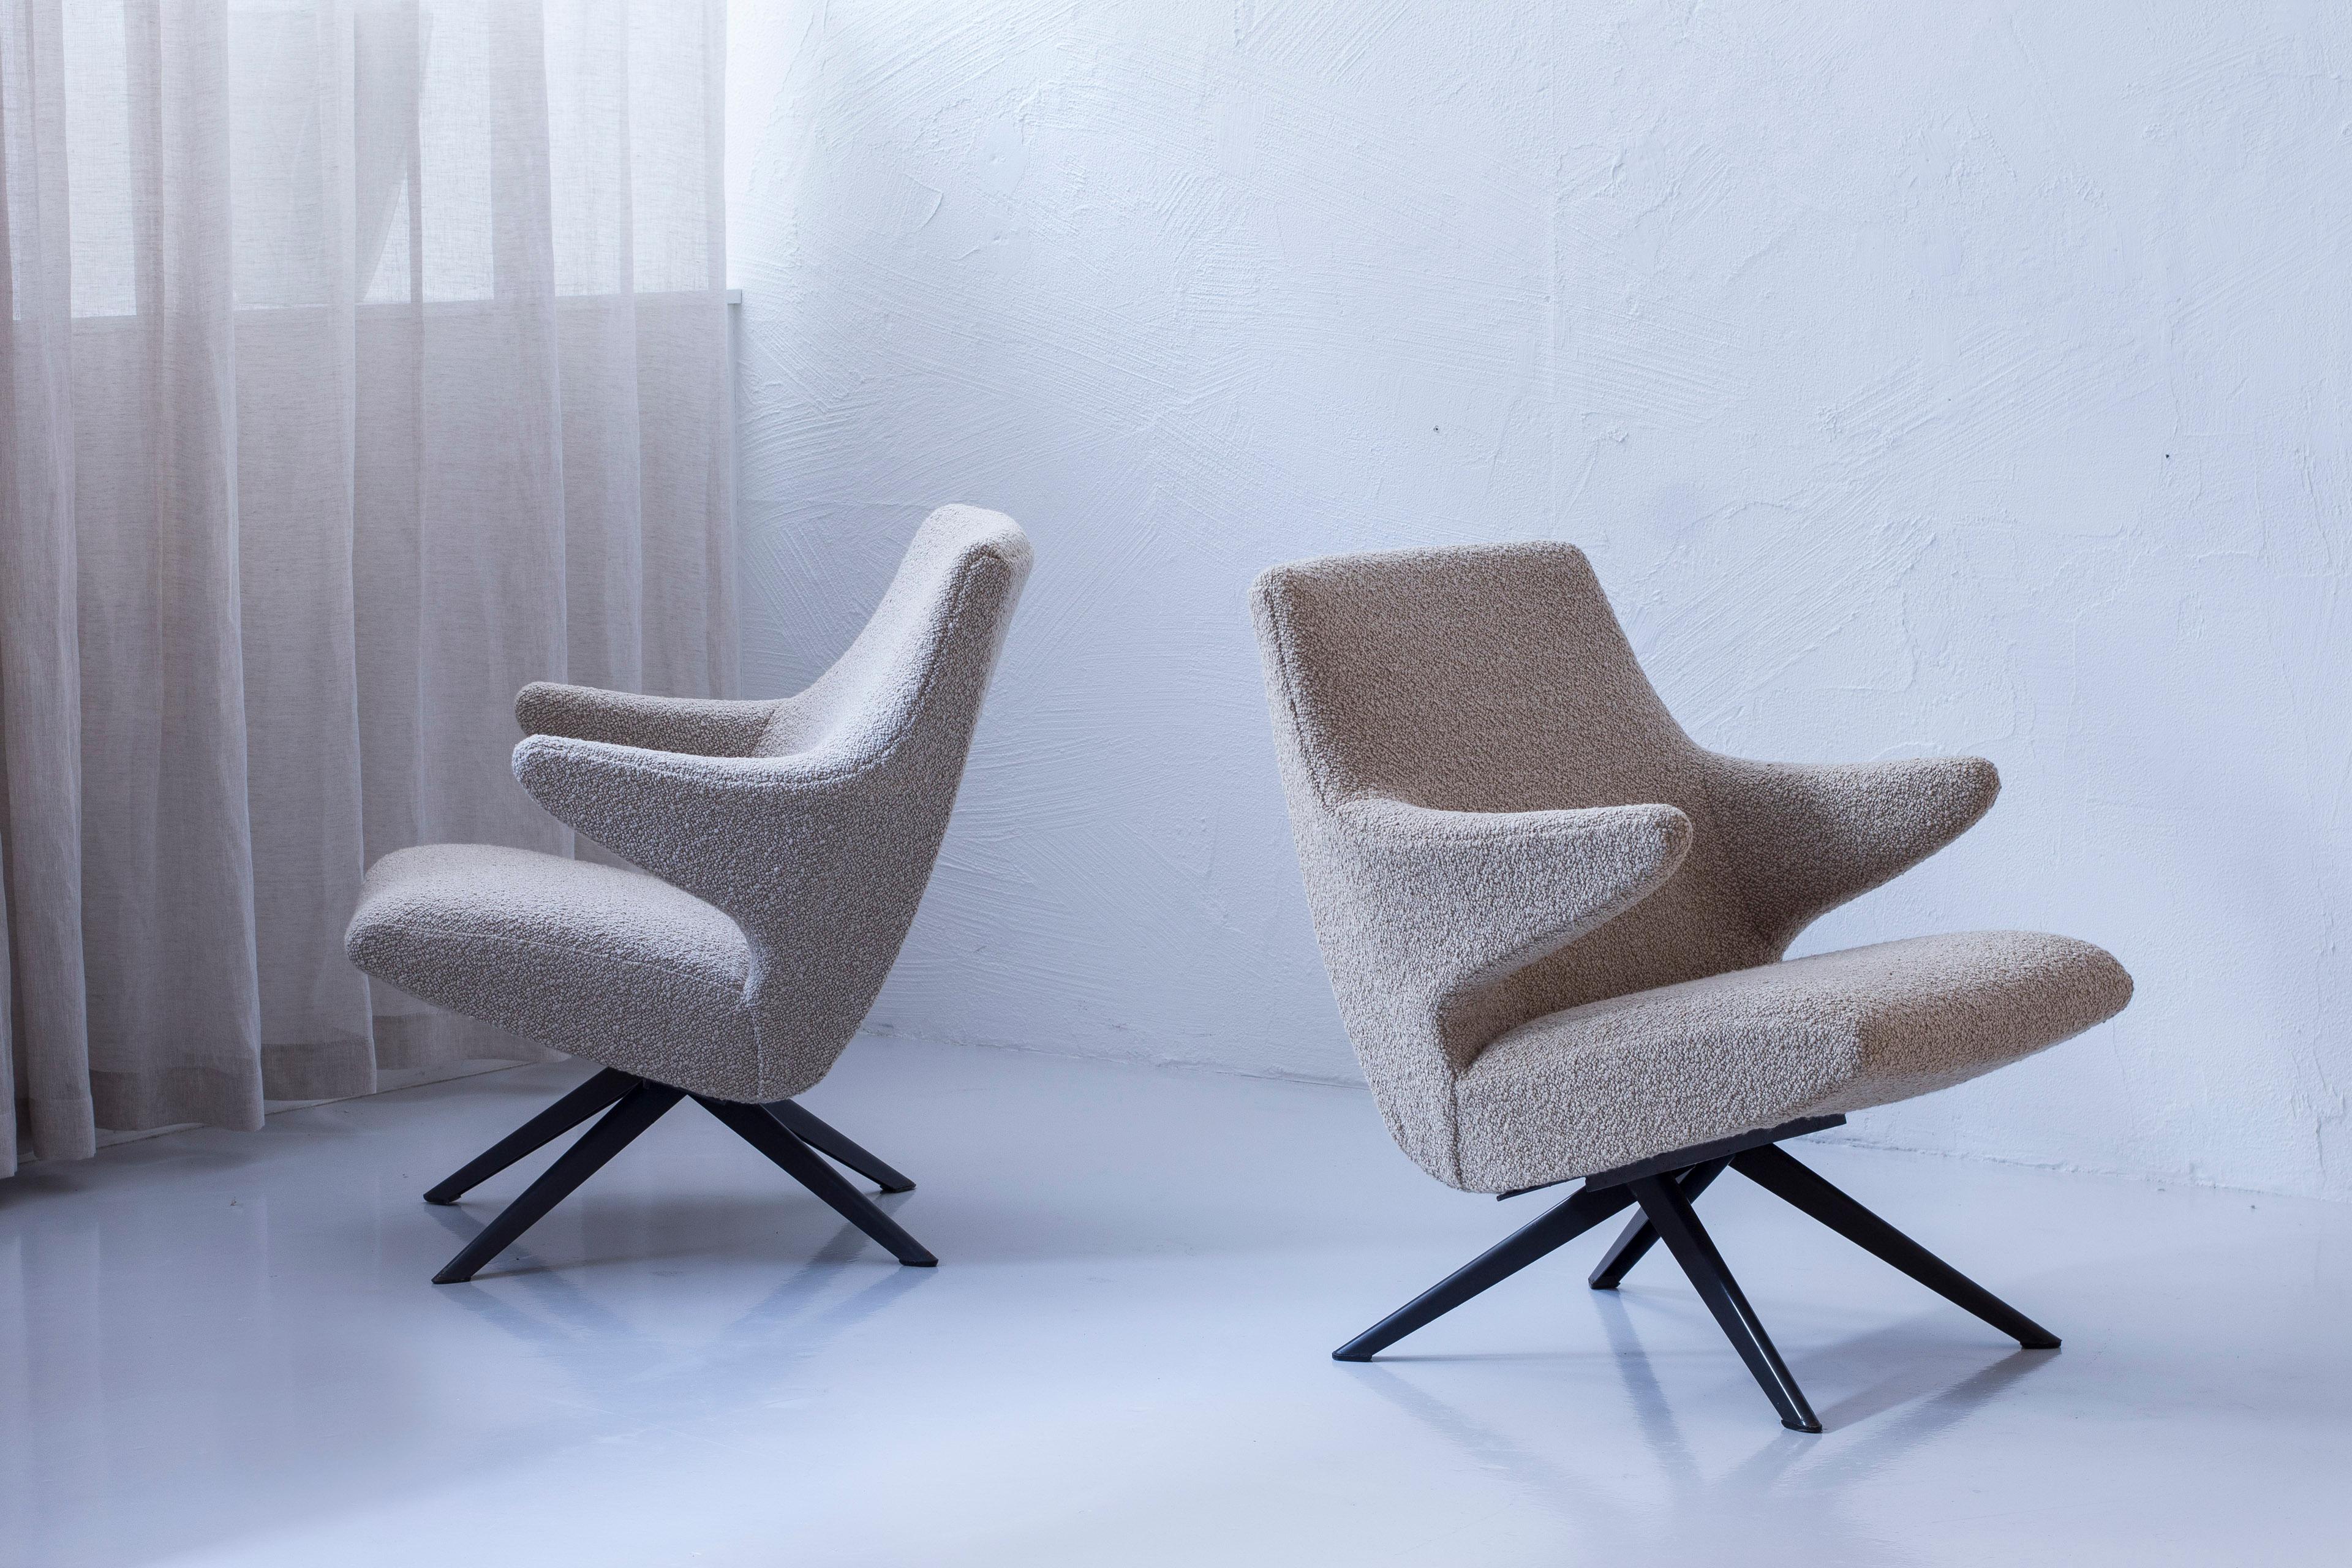 Pair of lounge chairs designed by Bengt Ruda by Nordiska Kompaniet, 1950 For Sale 4